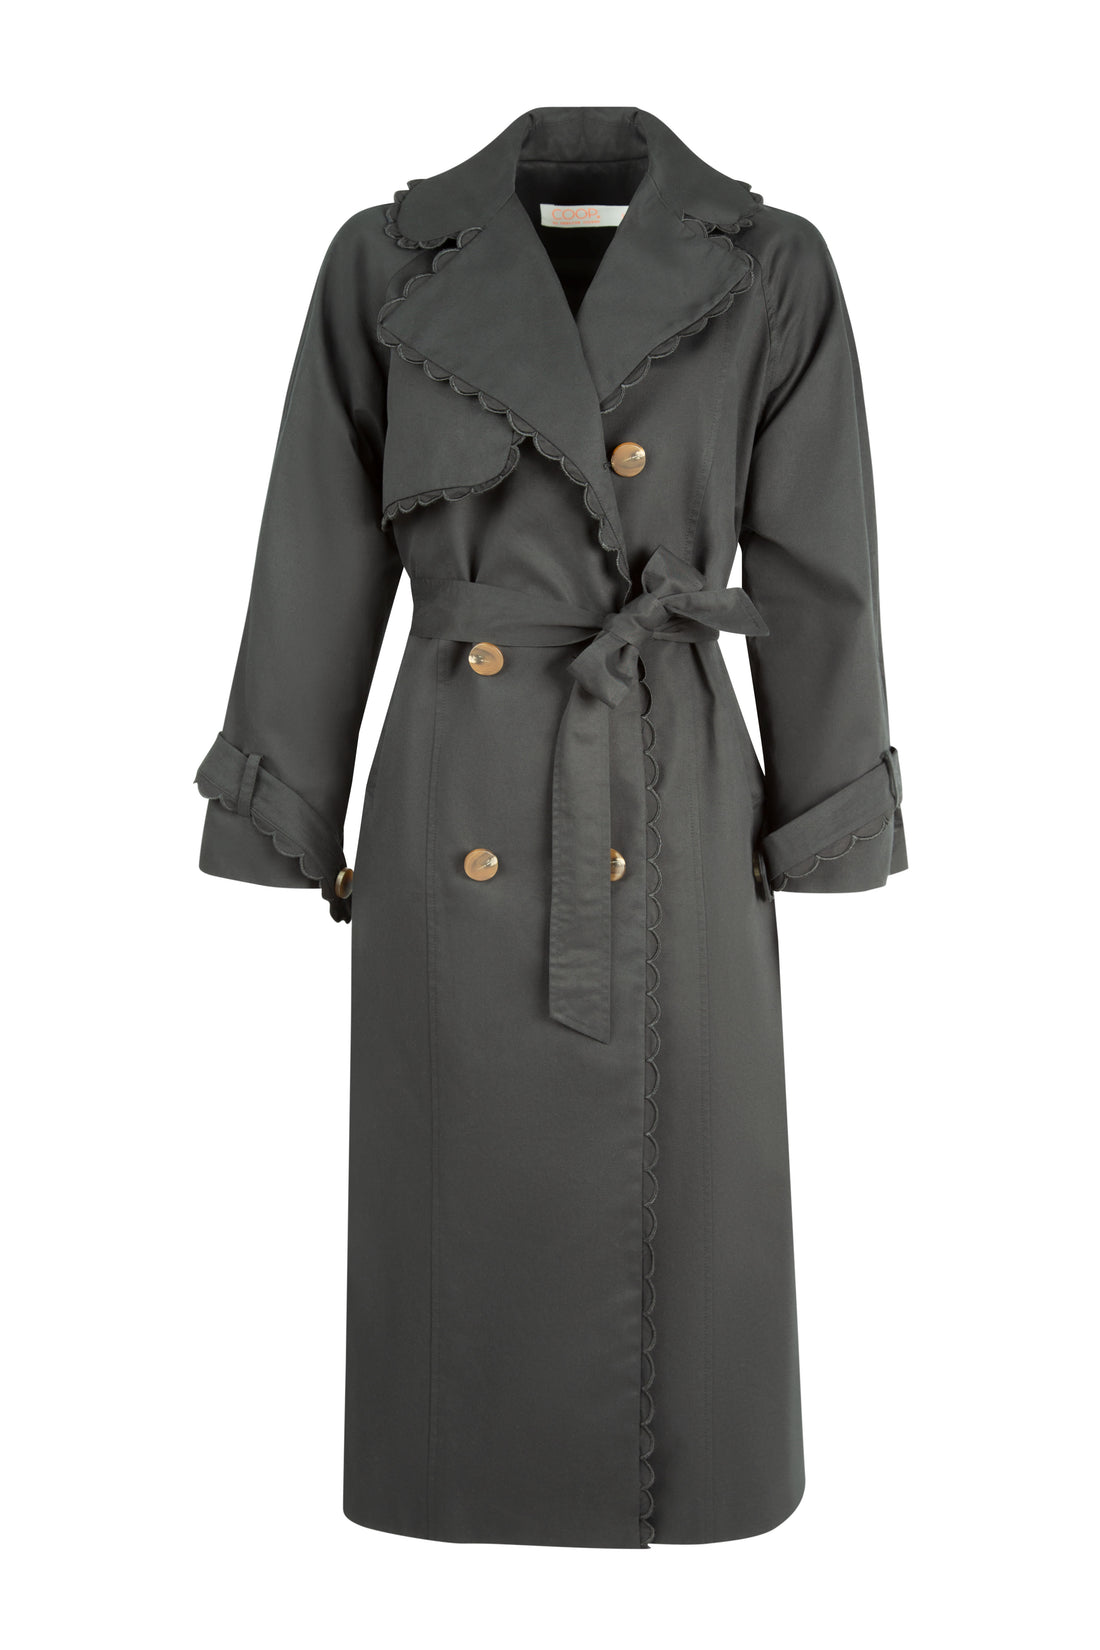 Coop By Trelise Cooper Trench Black Kiss Coat Time Twill Tell